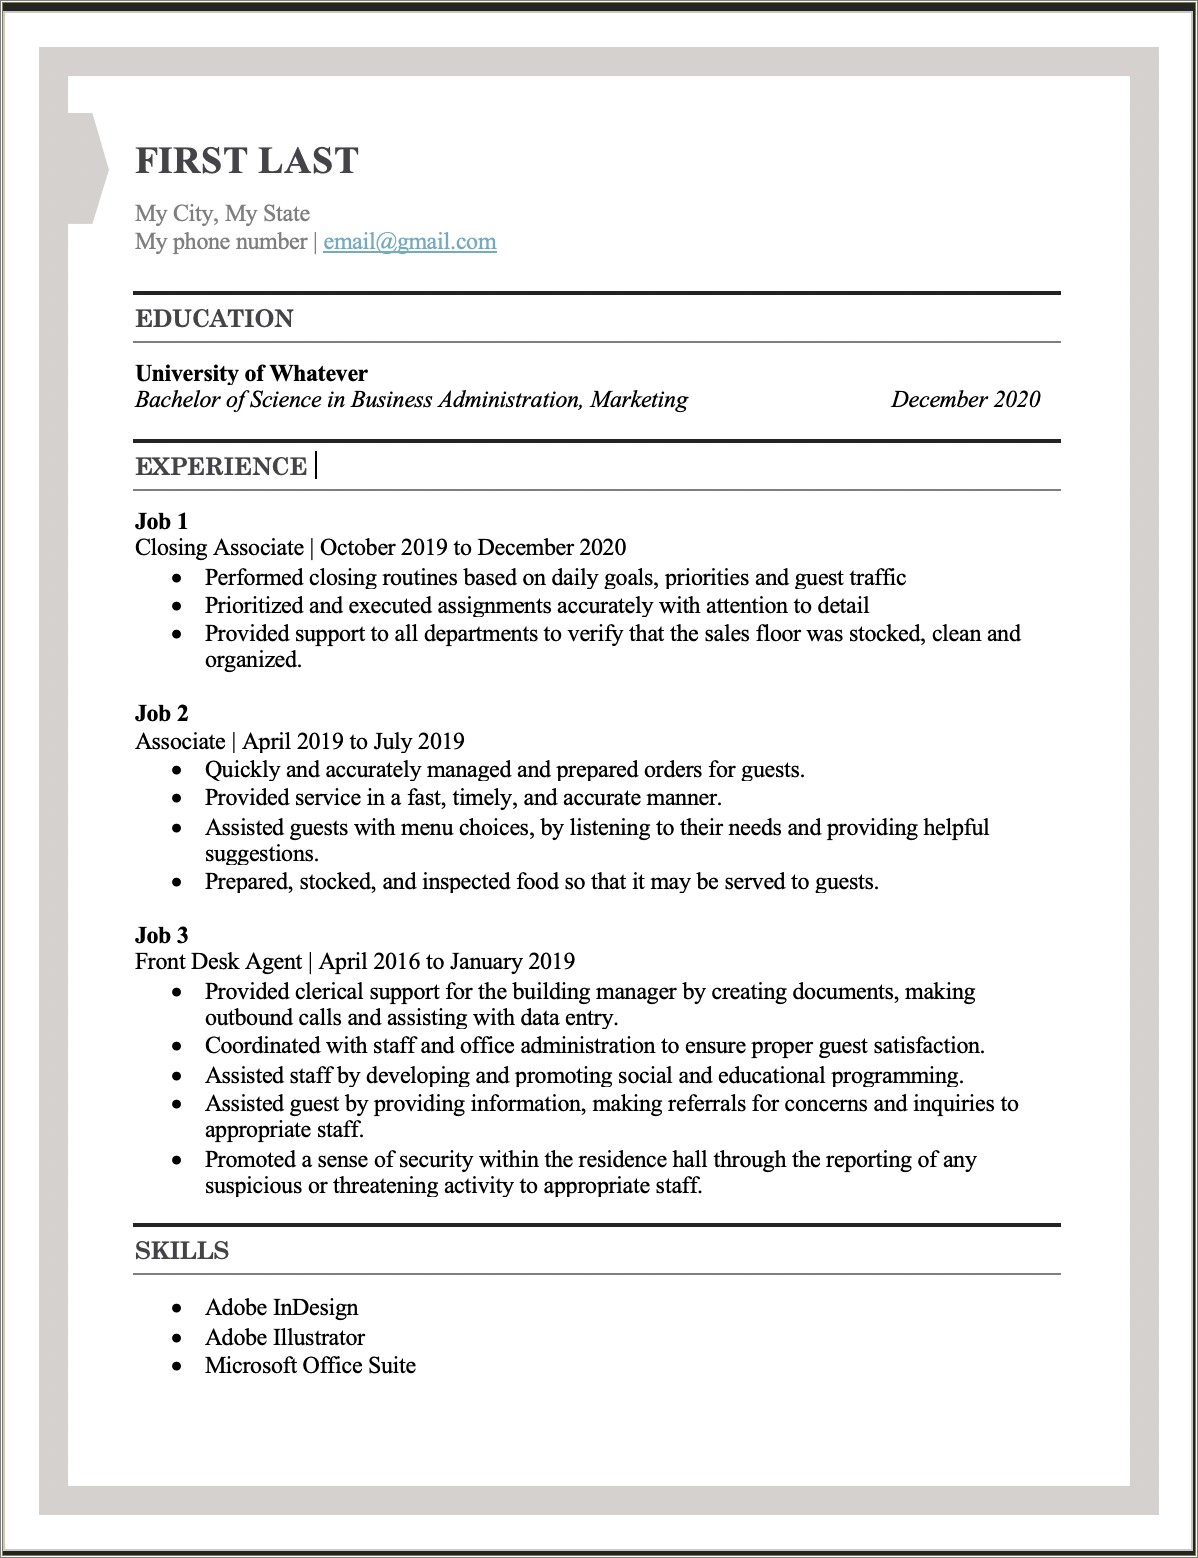 Resume Objective For Entry Level Marketing Position